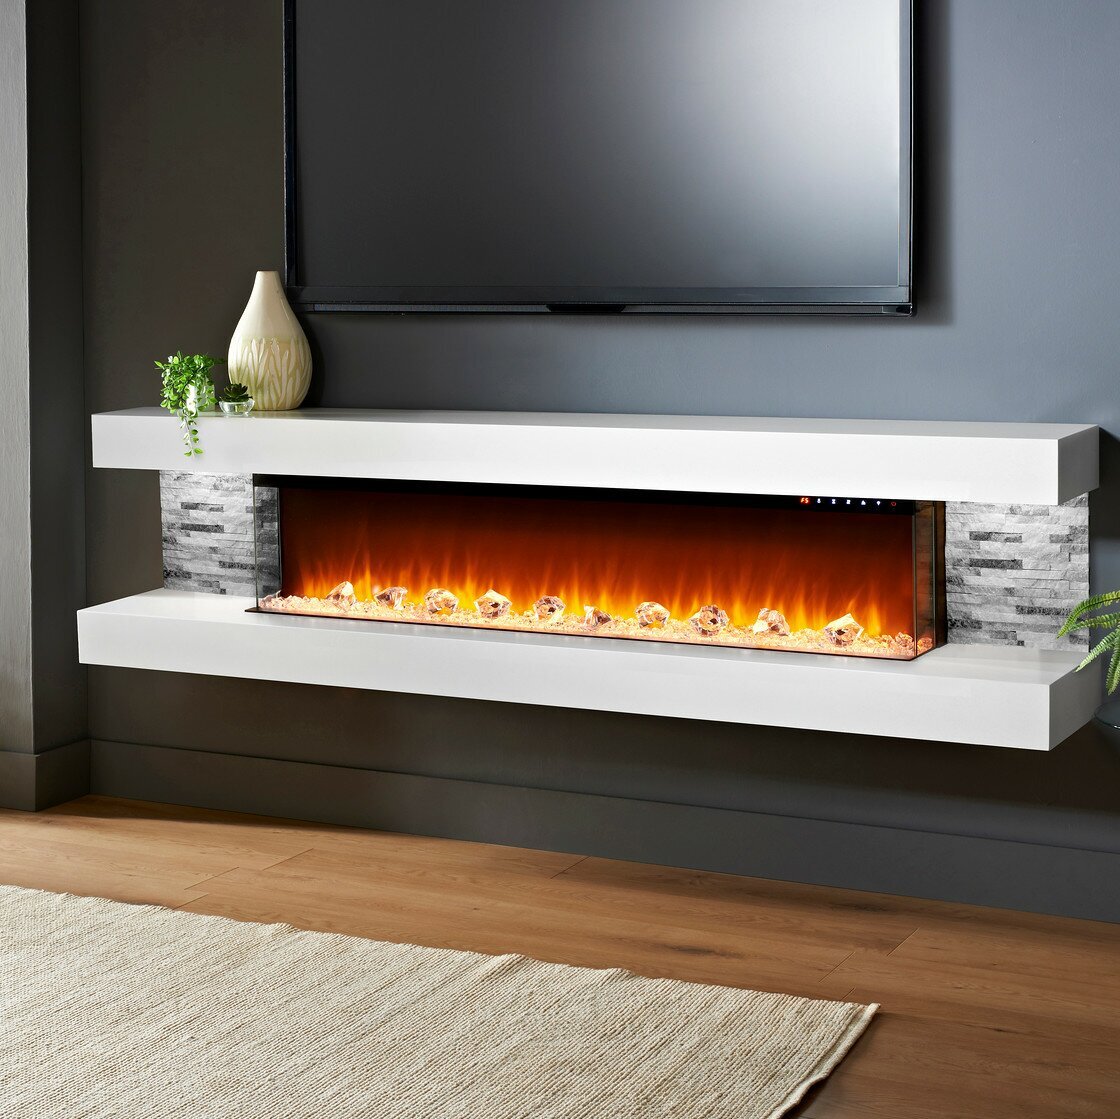 Mahalick Electric Fireplace with Cool Glass Feature